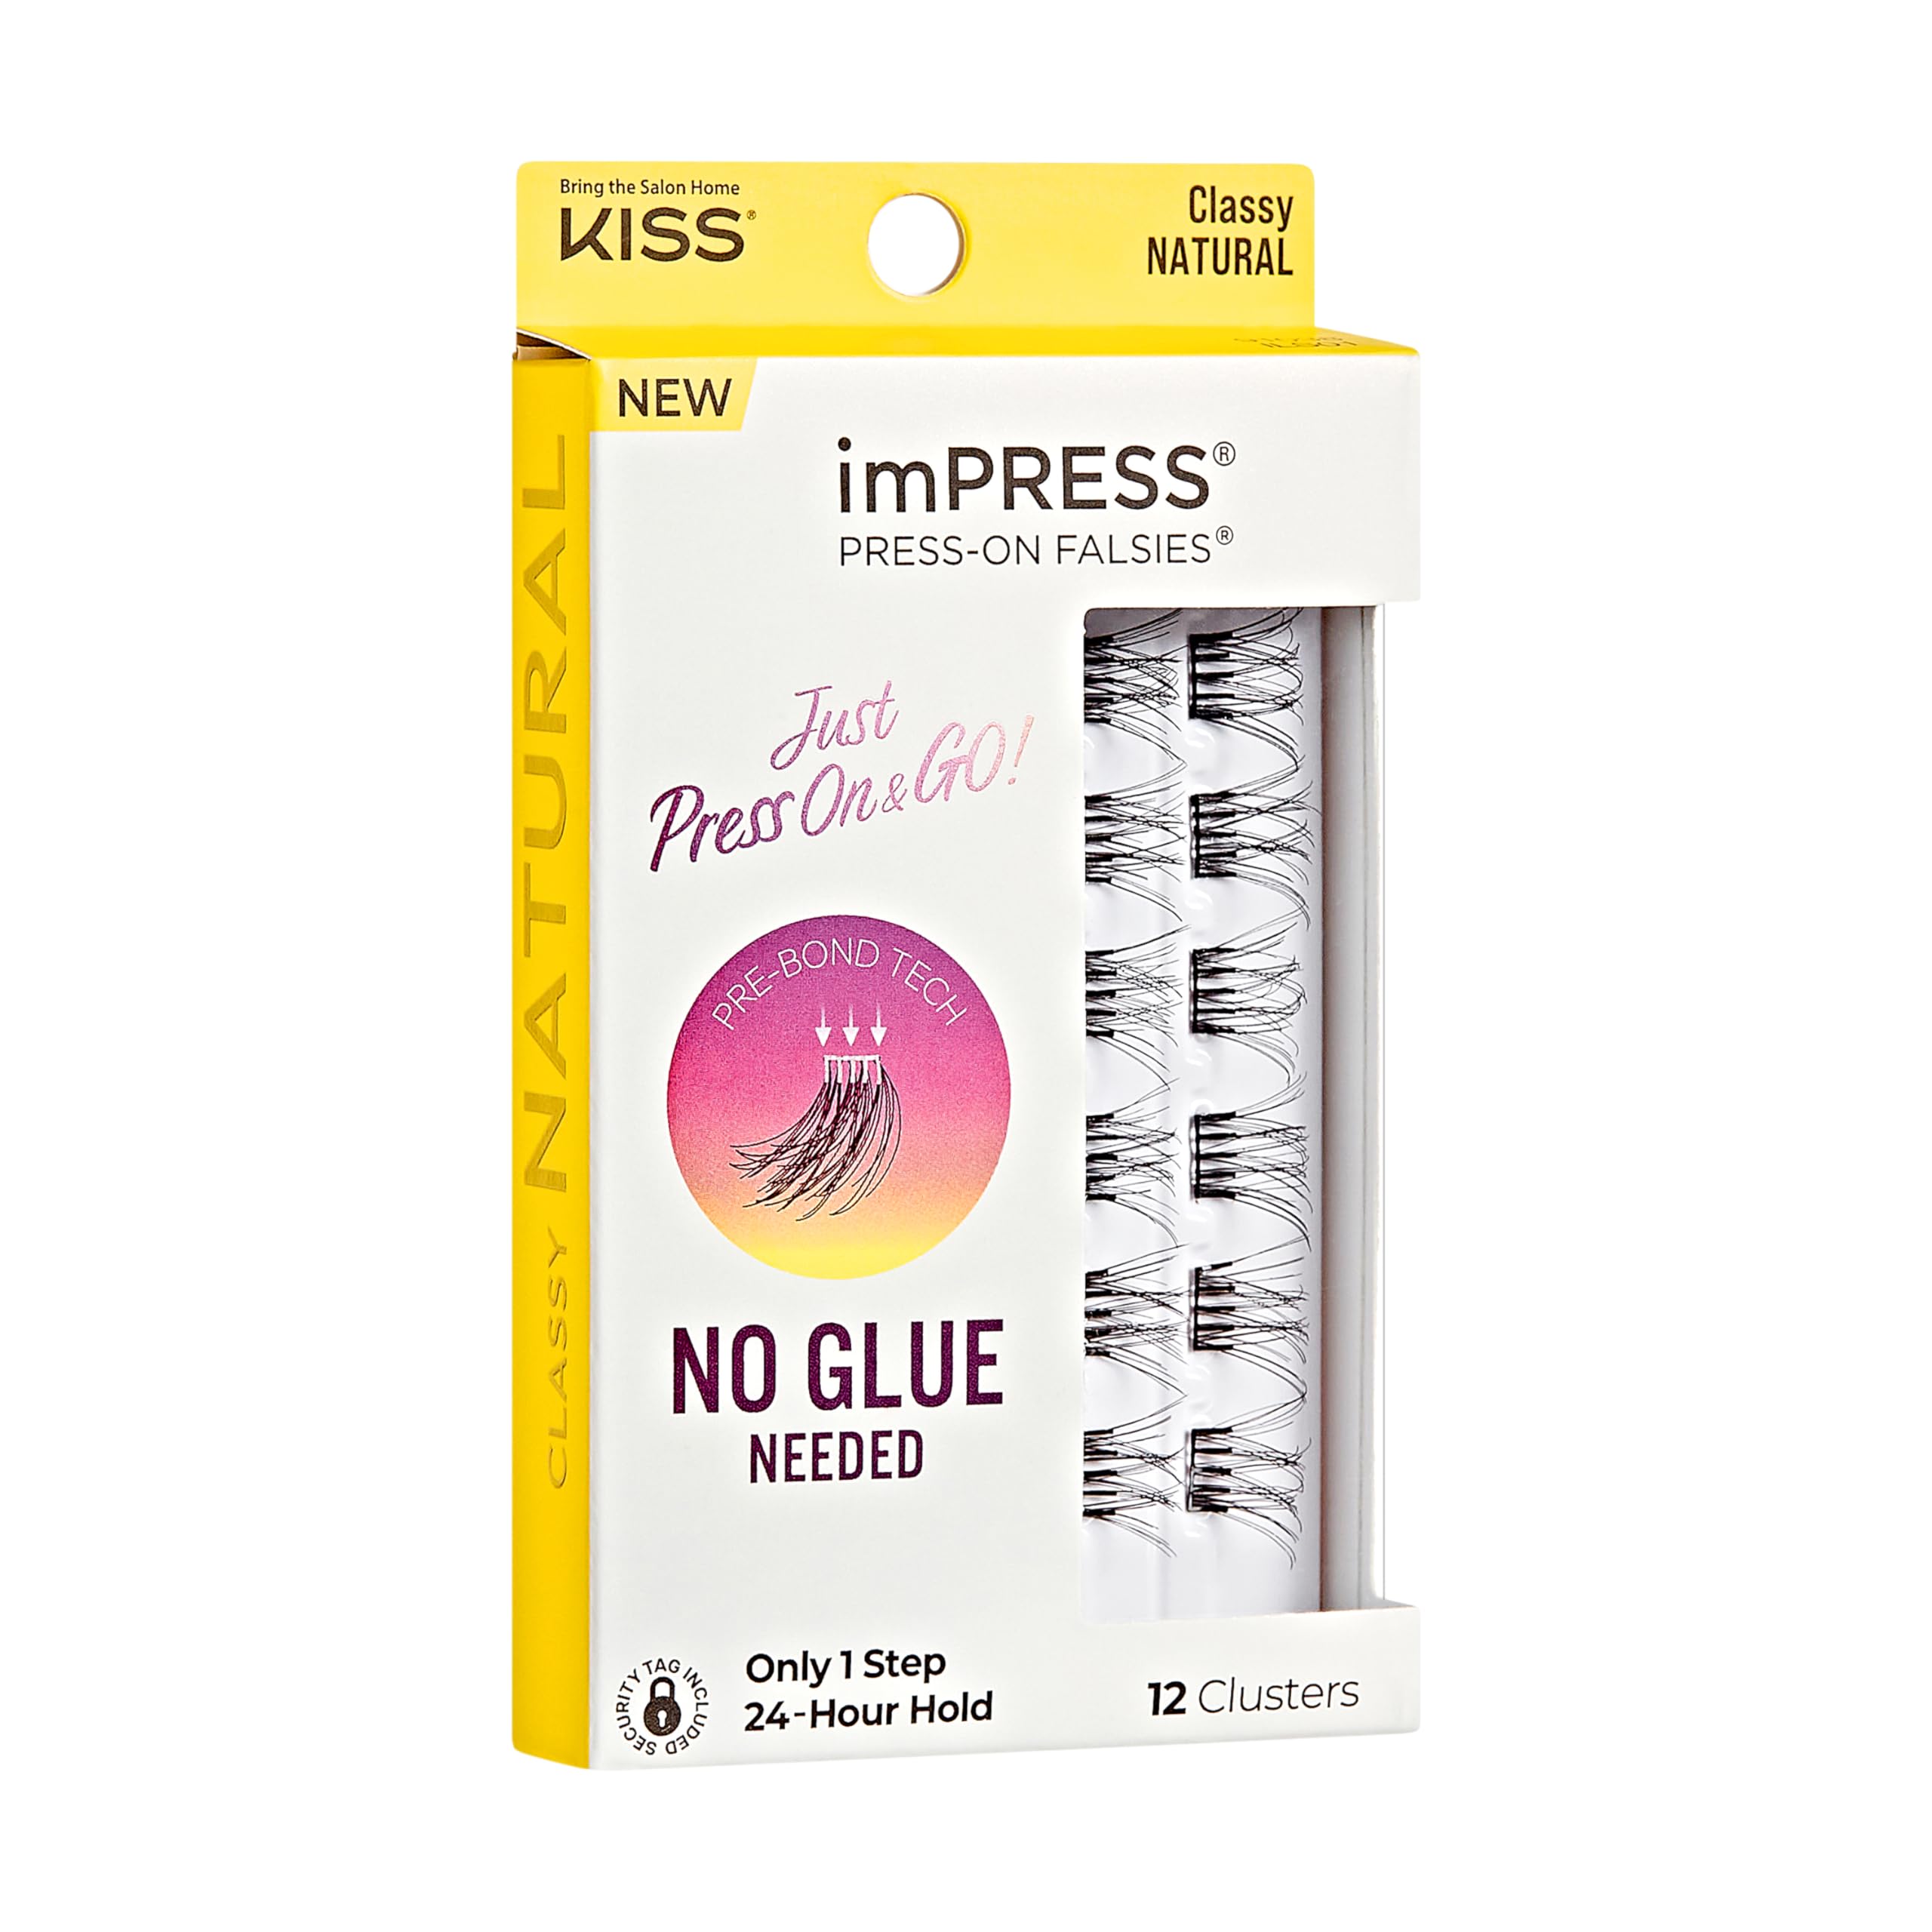 KISS imPRESS False Eyelashes, Lash Clusters, Falsies, Classy Natural', 10mm-12mm, Includes 12 Pieces of pre-Bonded Lashes, Contact Lens Friendly, Easy to Apply, Reusable Strip Lashes